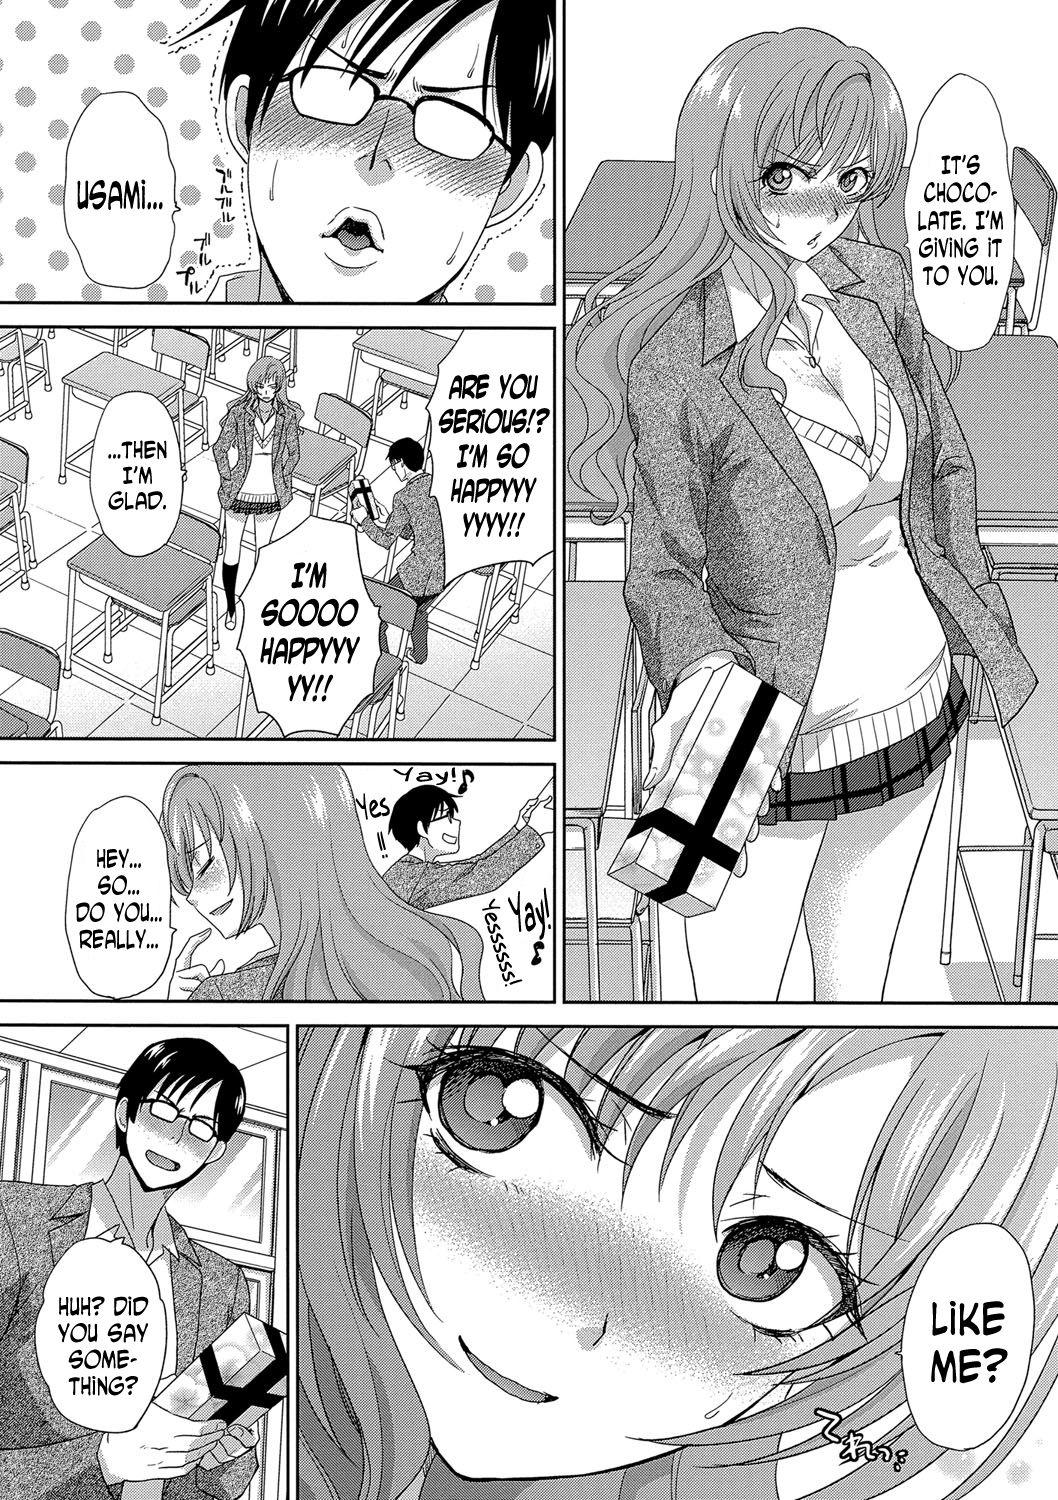 Fucking Choco wa Omake de |The Chocolate is a Free Gift Straight Porn - Page 4